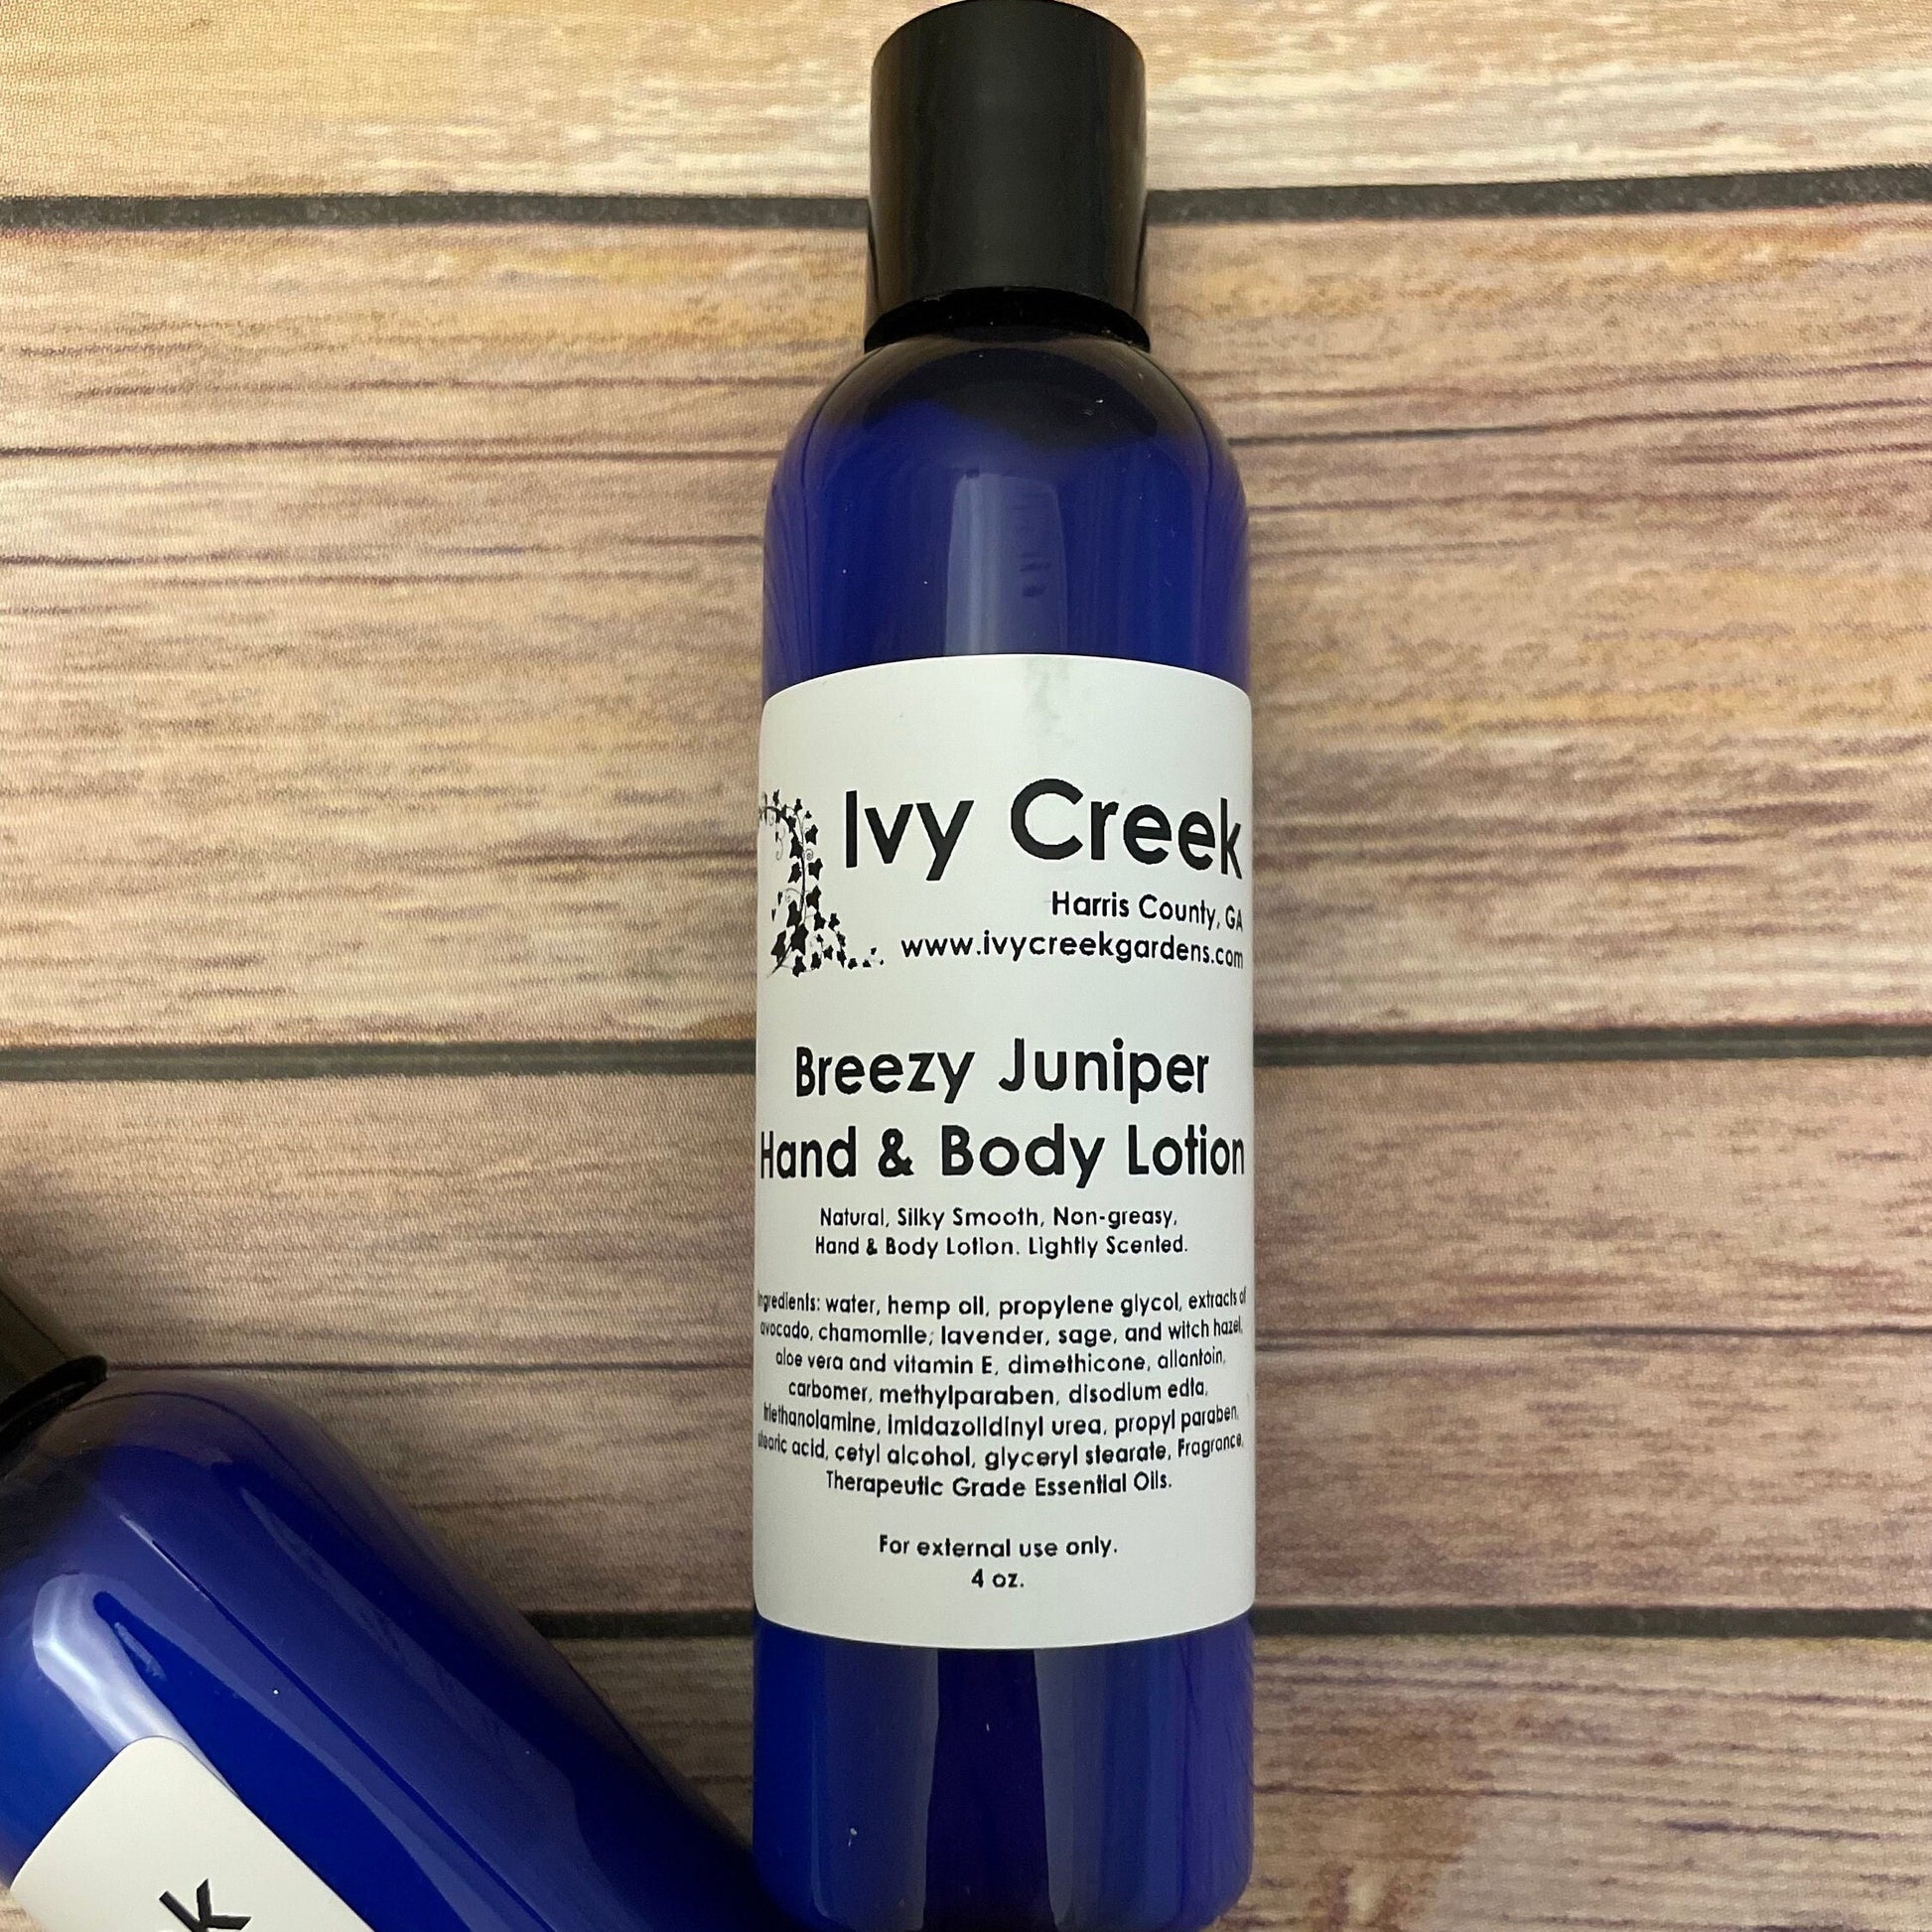 Ivy Creek Breezy Juniper Silky Smooth Hand & Body Lotion - All-Natural, Holistic, Lightly Scented - Ready to Ship - 4 oz